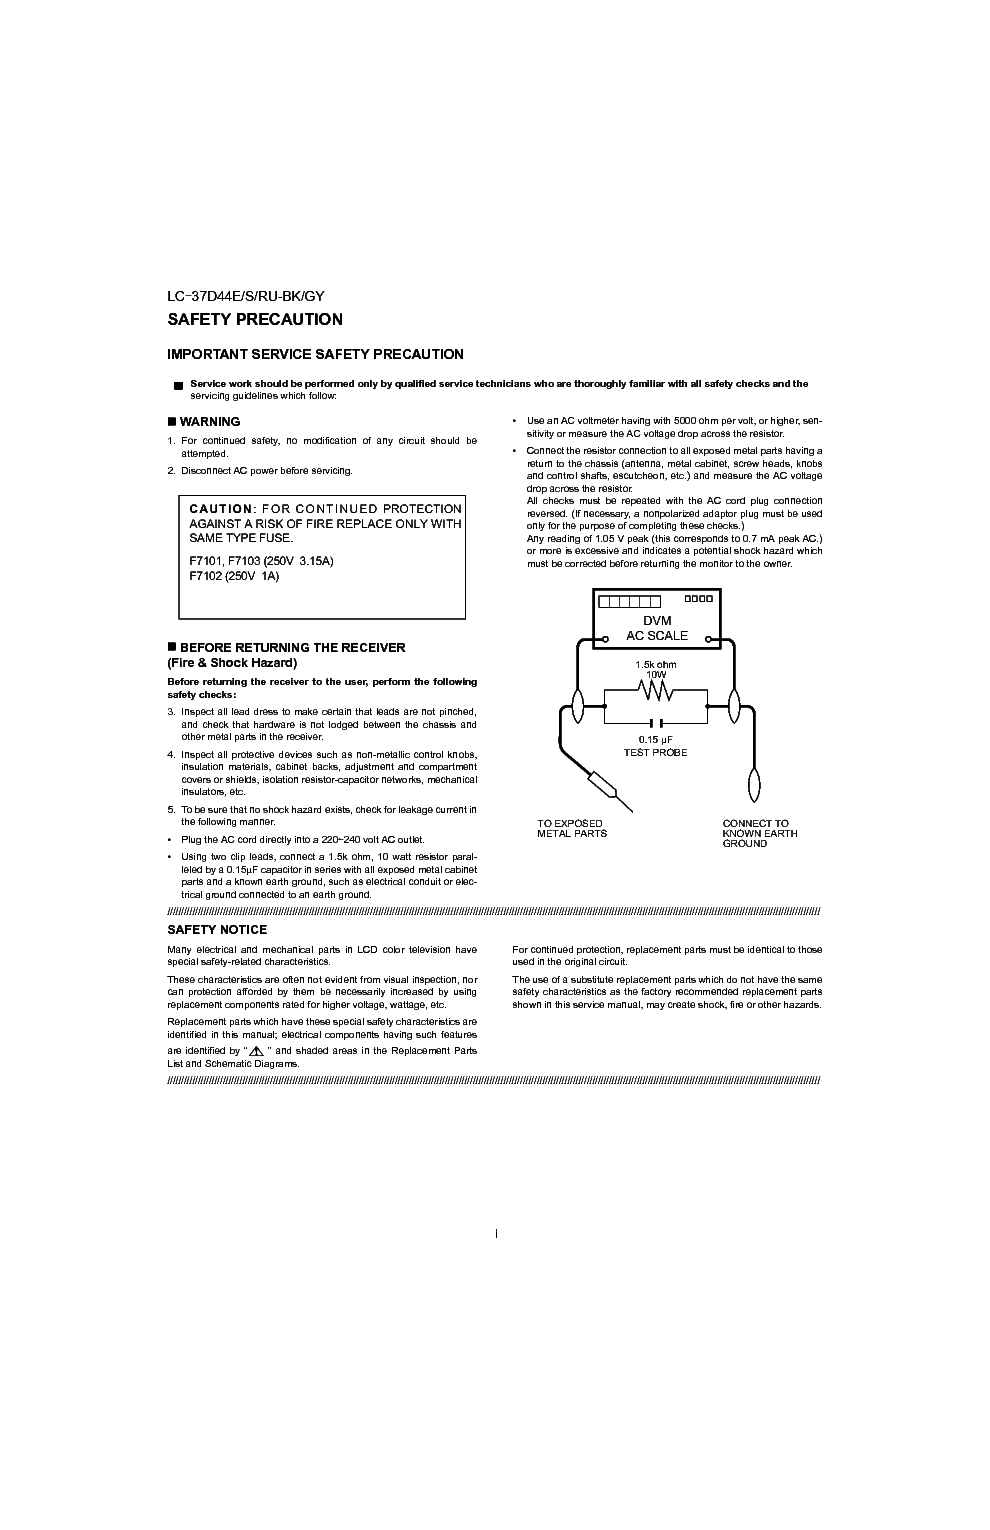 SHARP LC-37D44E S RU-BK GY service manual (2nd page)